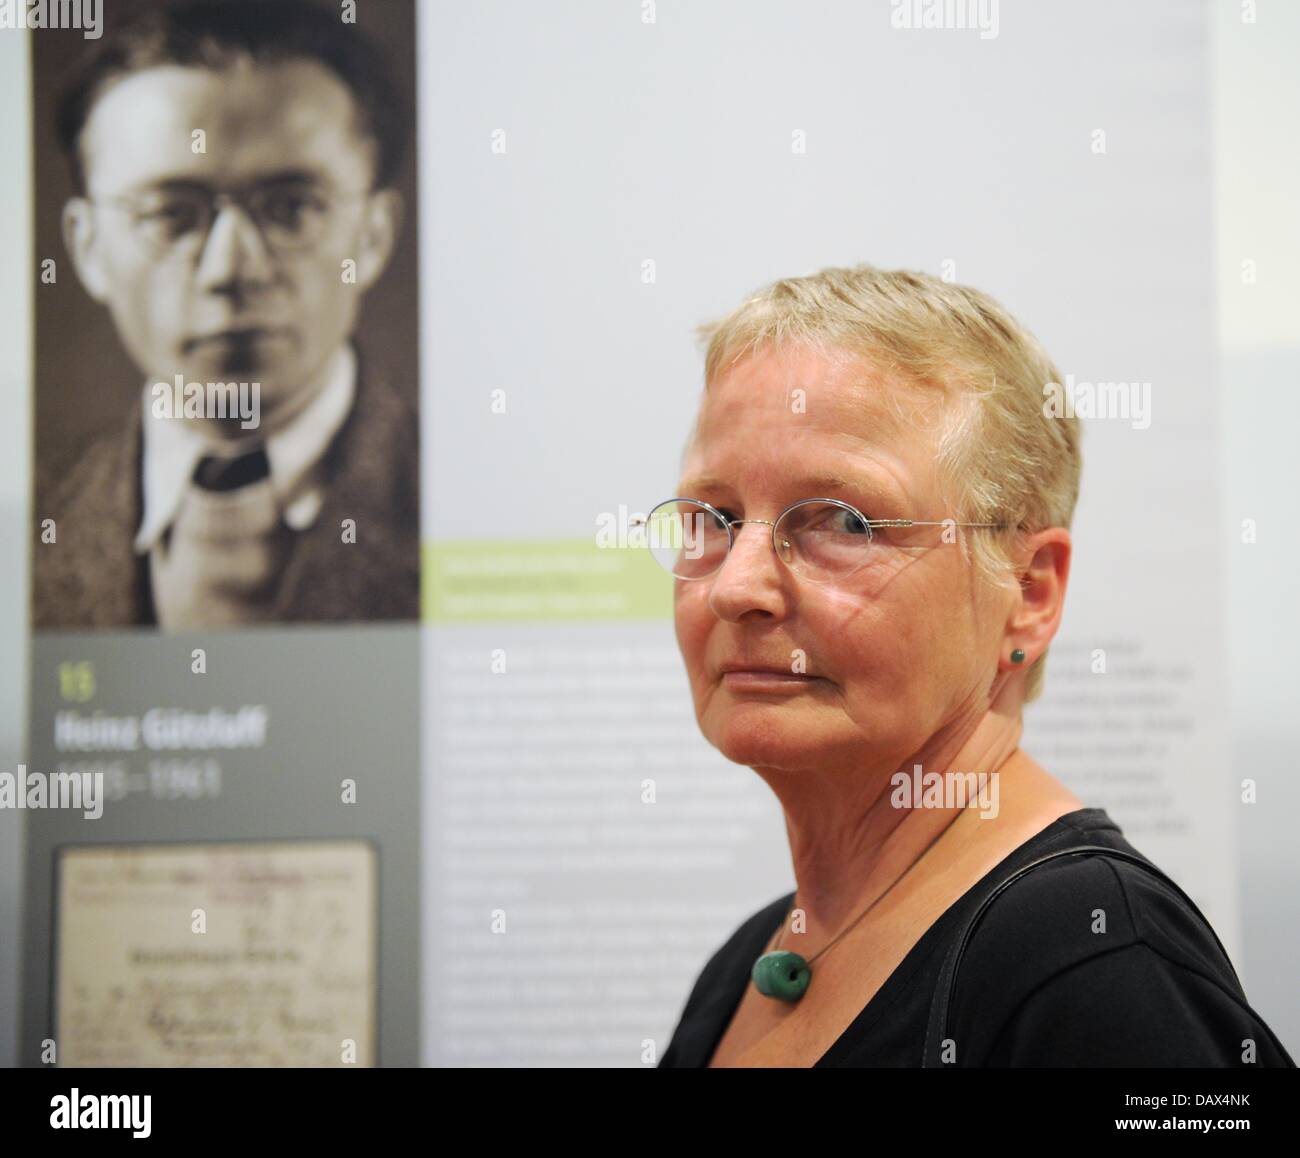 Kathrin Reiher stands in front of a poster portraying her father in the exhibition 'Warum schweigt die Welt - Häftlinge im Berliner KZ Columbiahaus' ('Why does the world keep silent - prisoners in the Berlin concentration camp Columbiahaus') at the Memorial to the German Resistance in Berlin, Germany, 19 July 2013. The exhibition is about the Berlin concentration camp Columbia. Photo: OLE SPATA Stock Photo